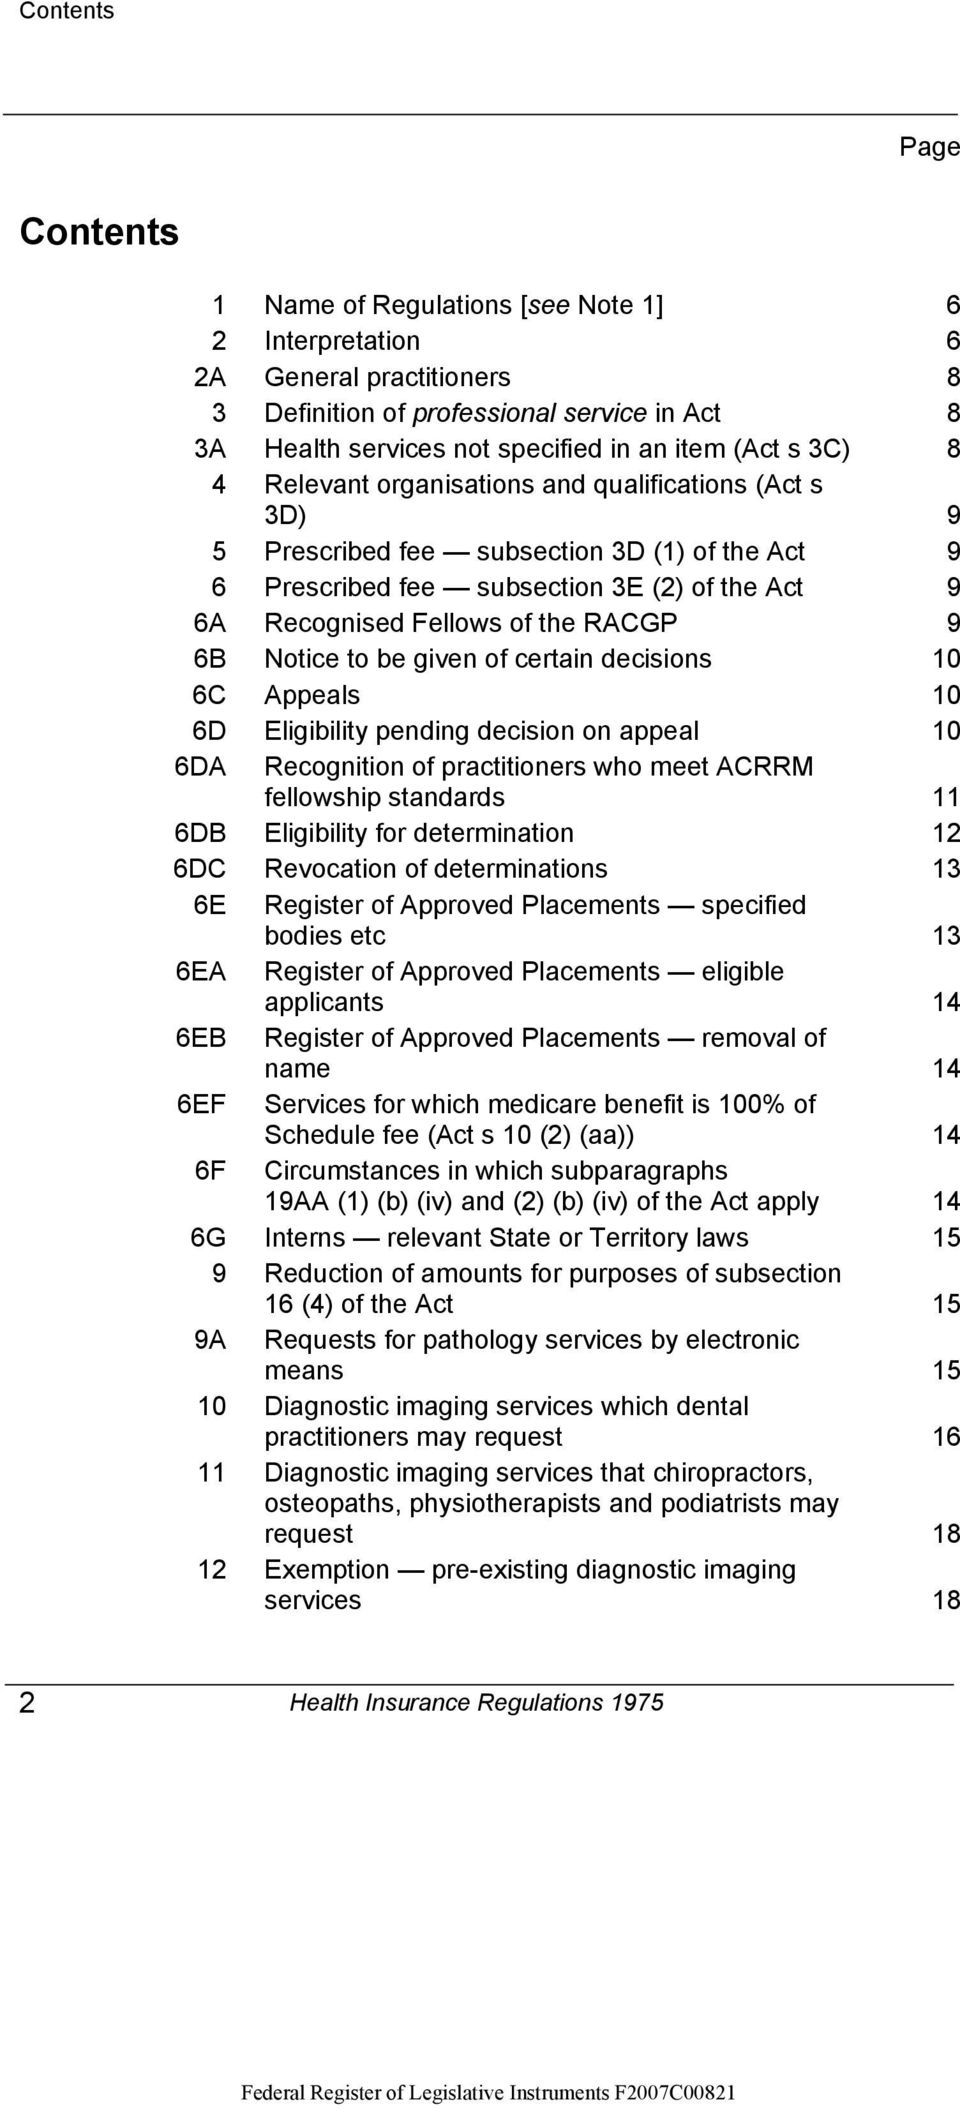 RACGP 9 6B Notice to be given of certain decisions 10 6C Appeals 10 6D Eligibility pending decision on appeal 10 6DA Recognition of practitioners who meet ACRRM fellowship standards 11 6DB